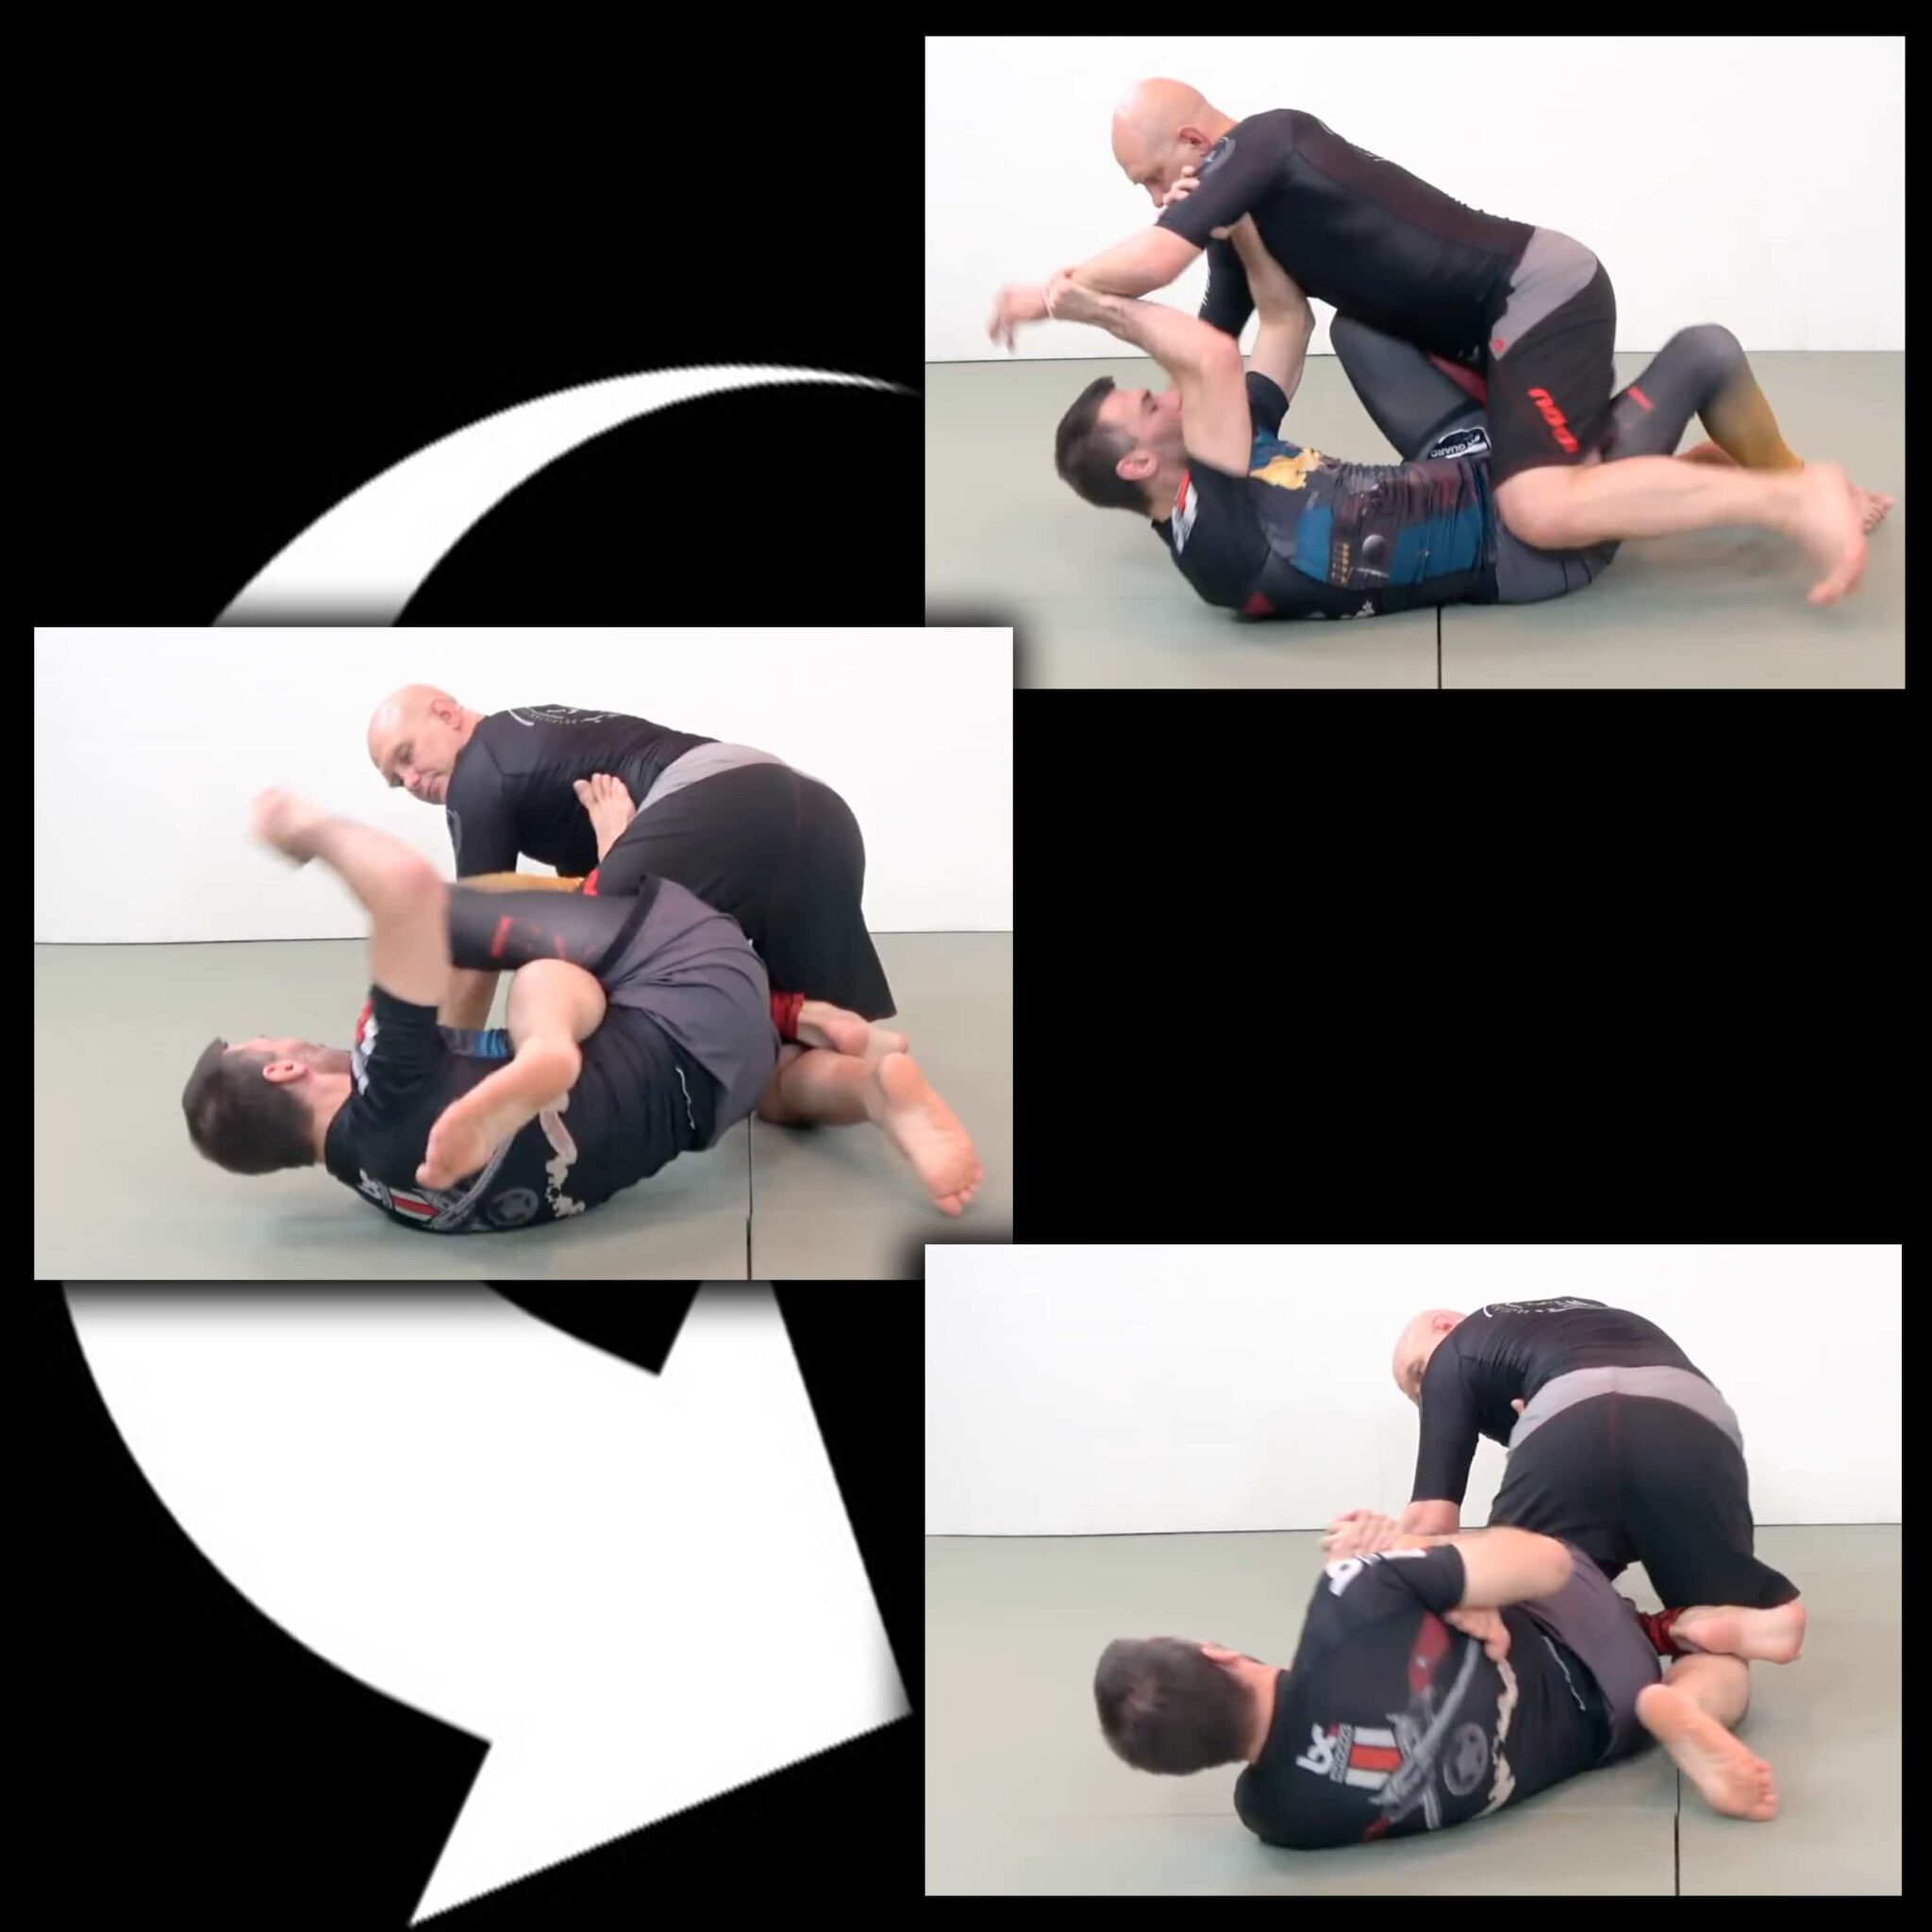 two on on grip half to leglock